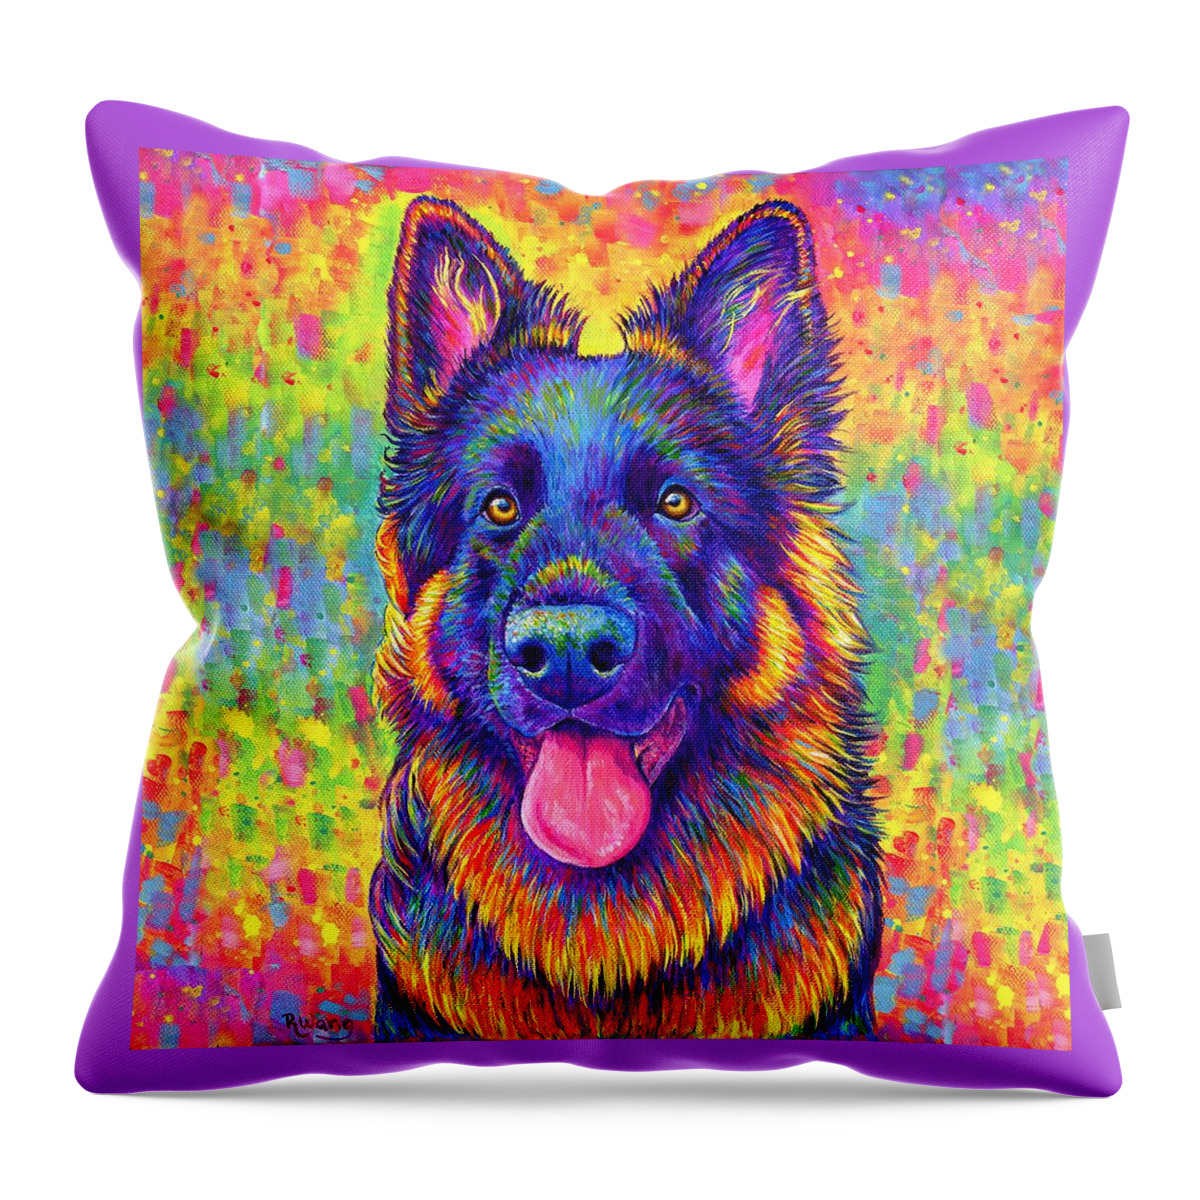 German Shepherd Throw Pillow featuring the painting Psychedelic Rainbow German Shepherd Dog by Rebecca Wang